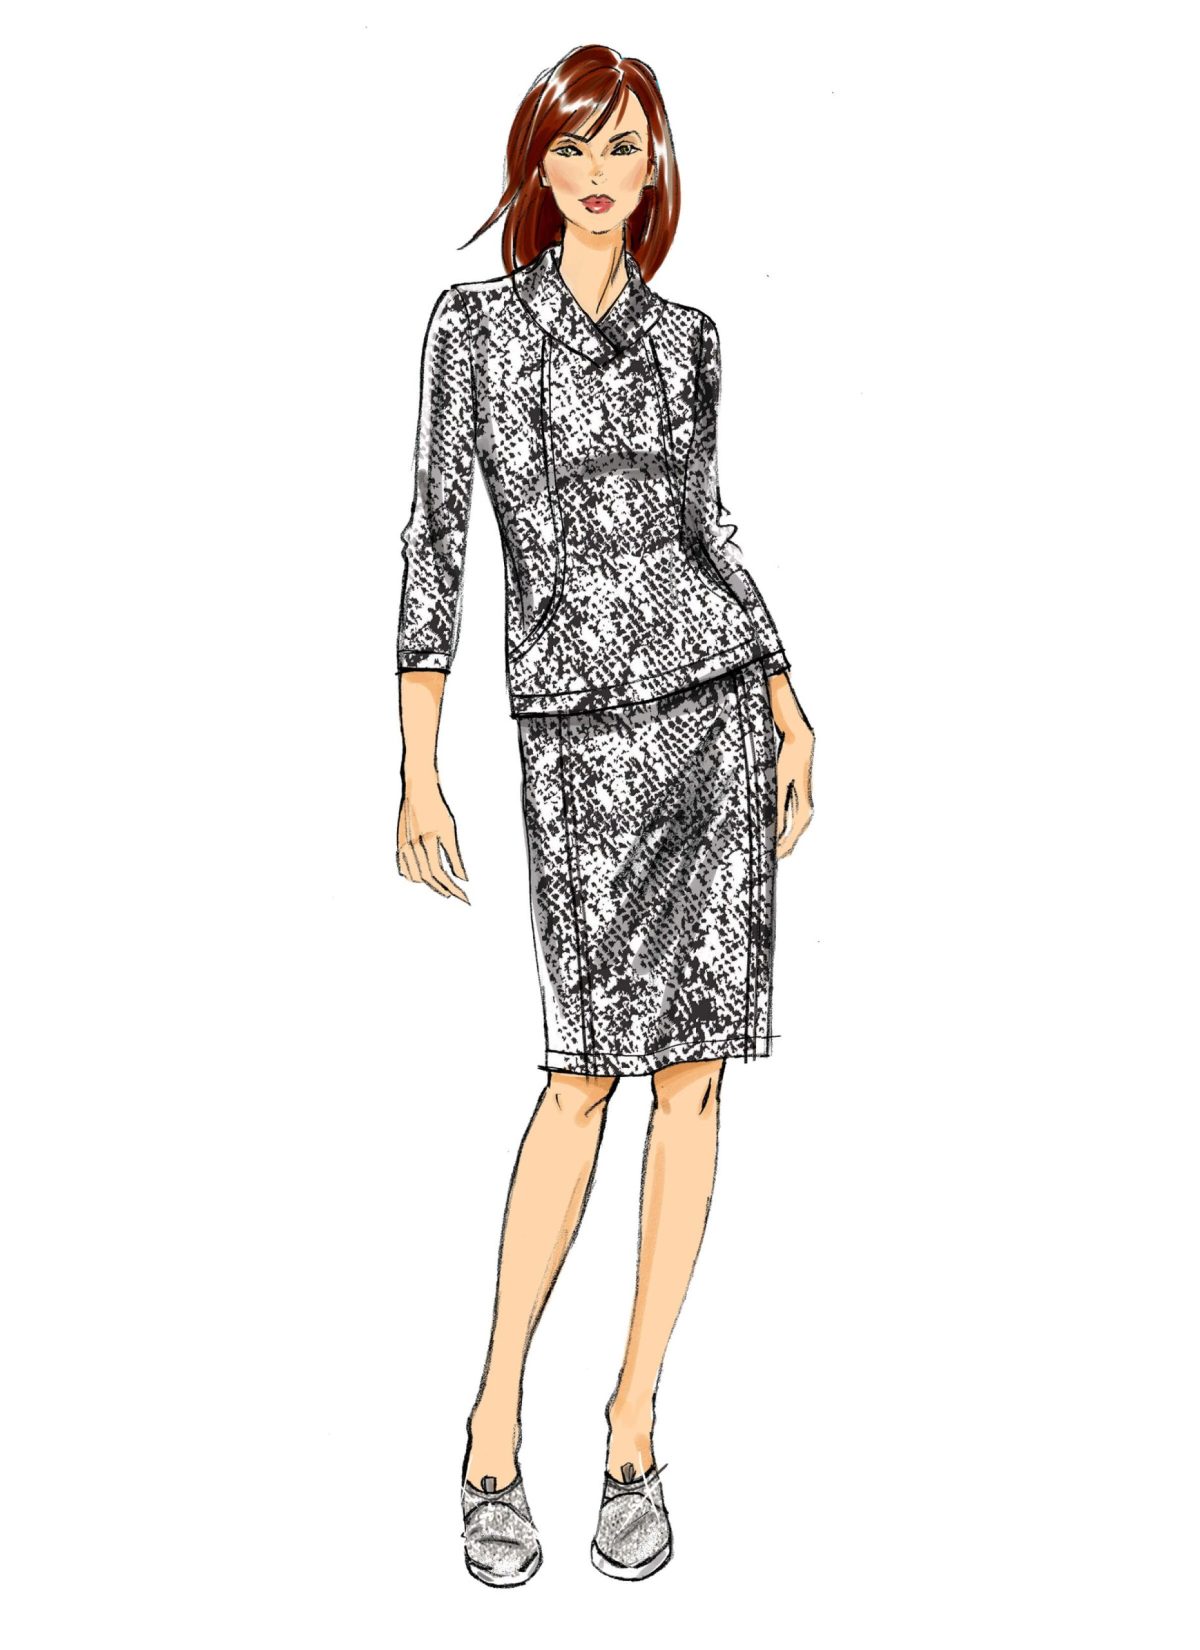 Butterick Sewing Pattern B6858 Misses' Knit Dress, Tops, Skirt and Trousers